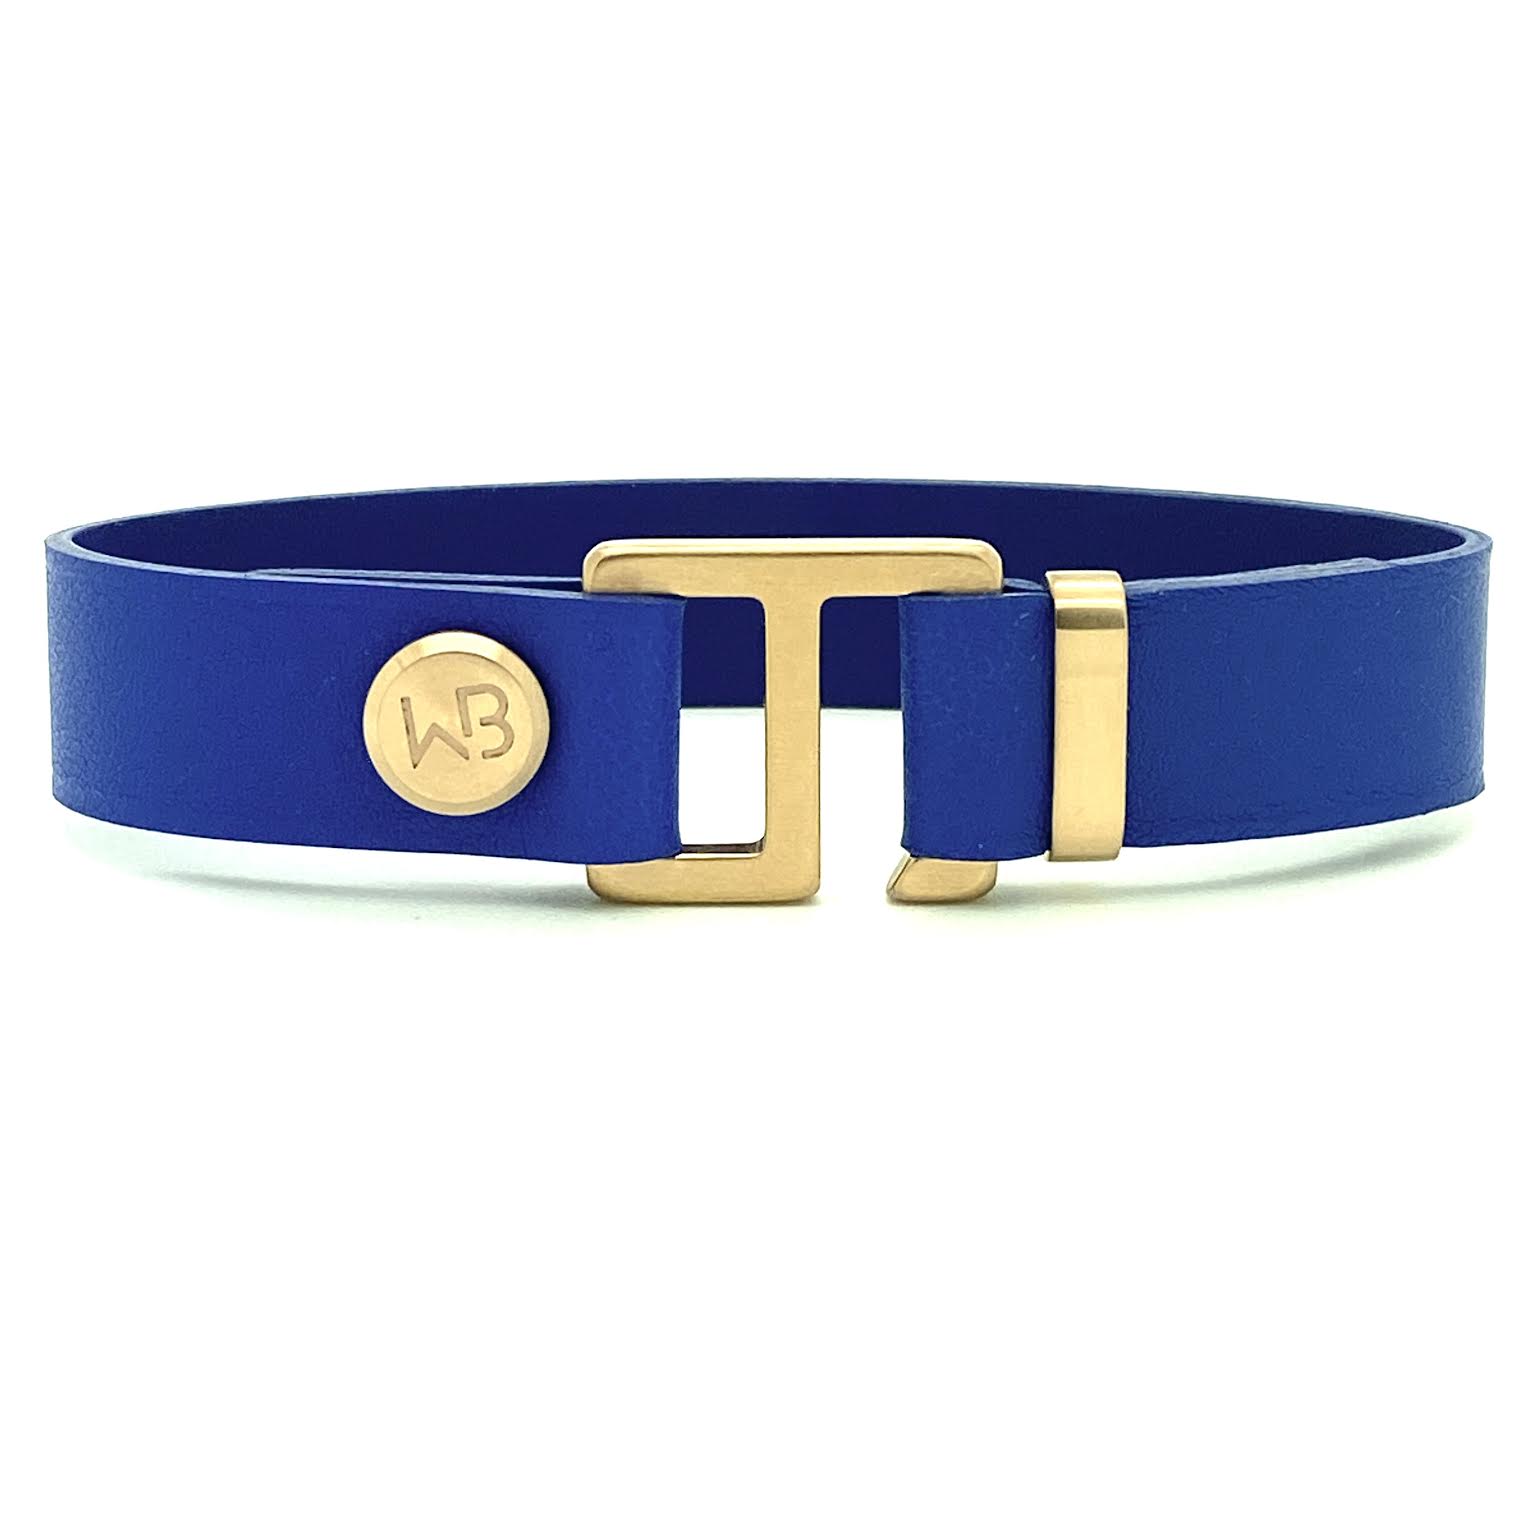 Our striking Elec Blue leather cuff bracelet is paired perfectly with our artisan designed, lightly brushed hardware.  Your hardware choices include Rose Gold, Yellow Gold, Stainless Steel and Black Ceramic. This adjustable size bracelet is a distinctive piece worn alone or with a WristBend stacking bracelet. Made by WristBend